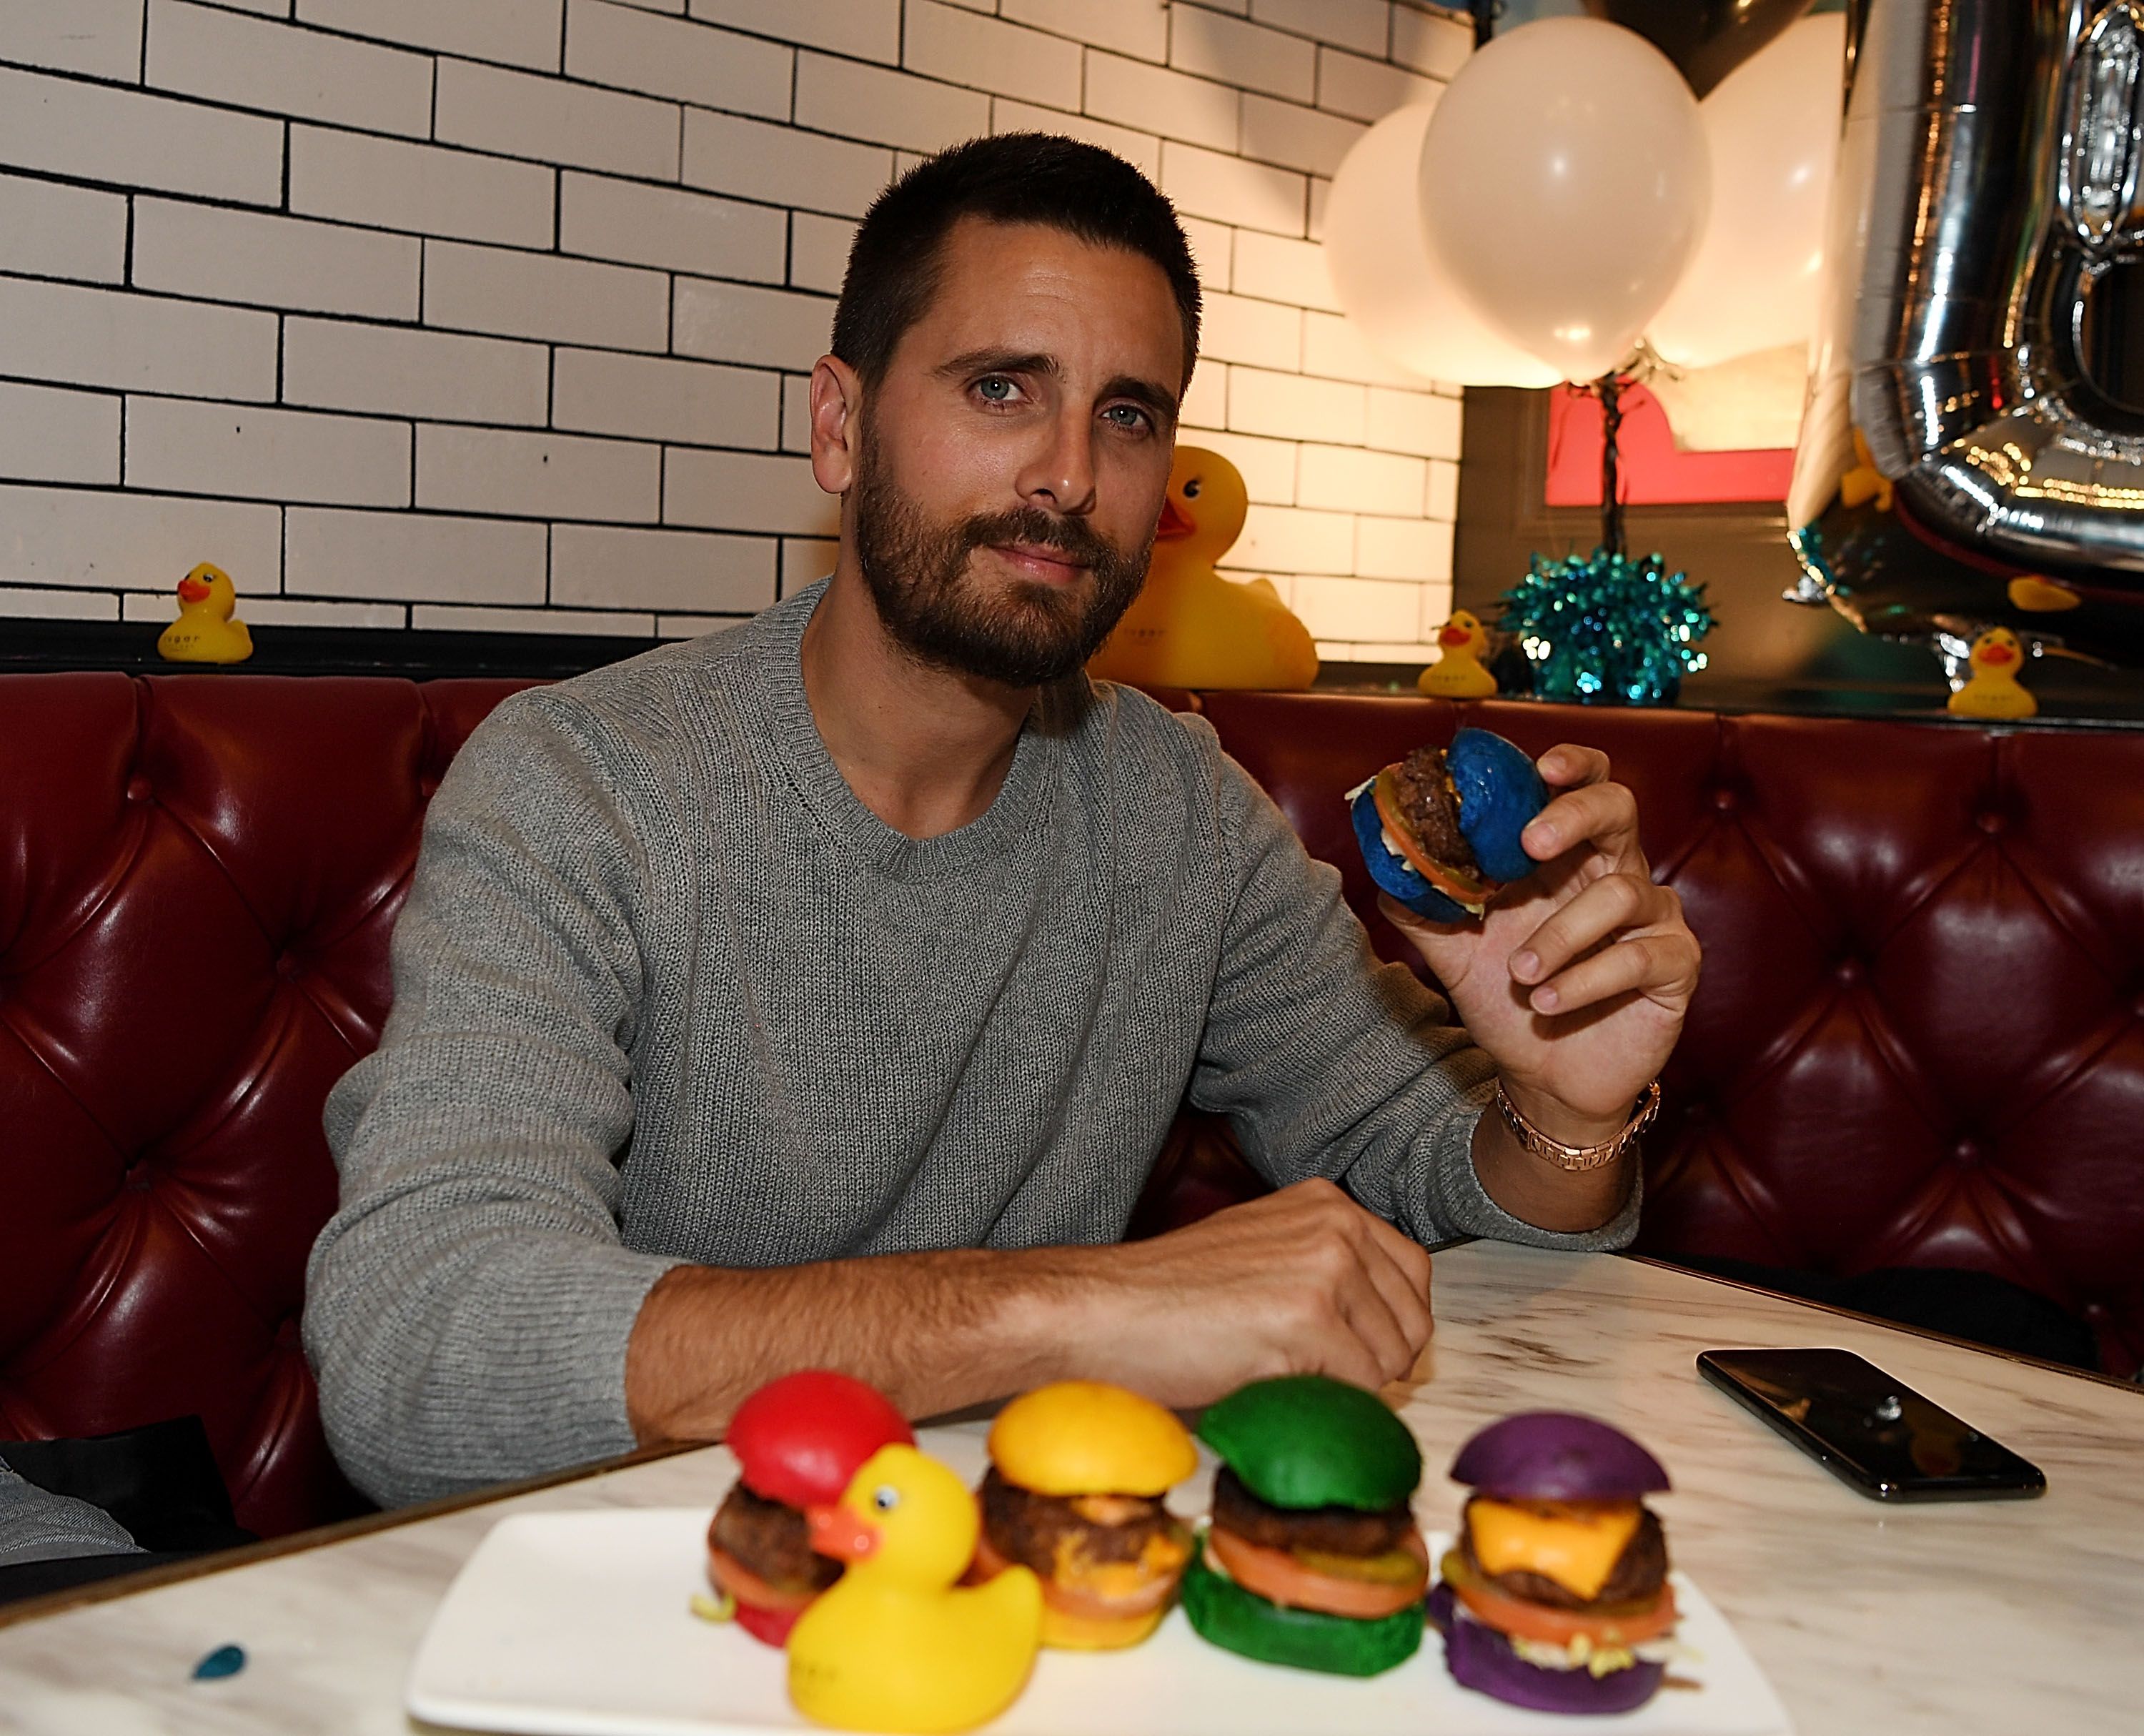 Scott Disick dines at Sugar Factory American Brasserie at Fashion Show Mall on January 4, 2019, in Las Vegas, Nevada | Photo: Denise Truscello/WireImage/Getty Images